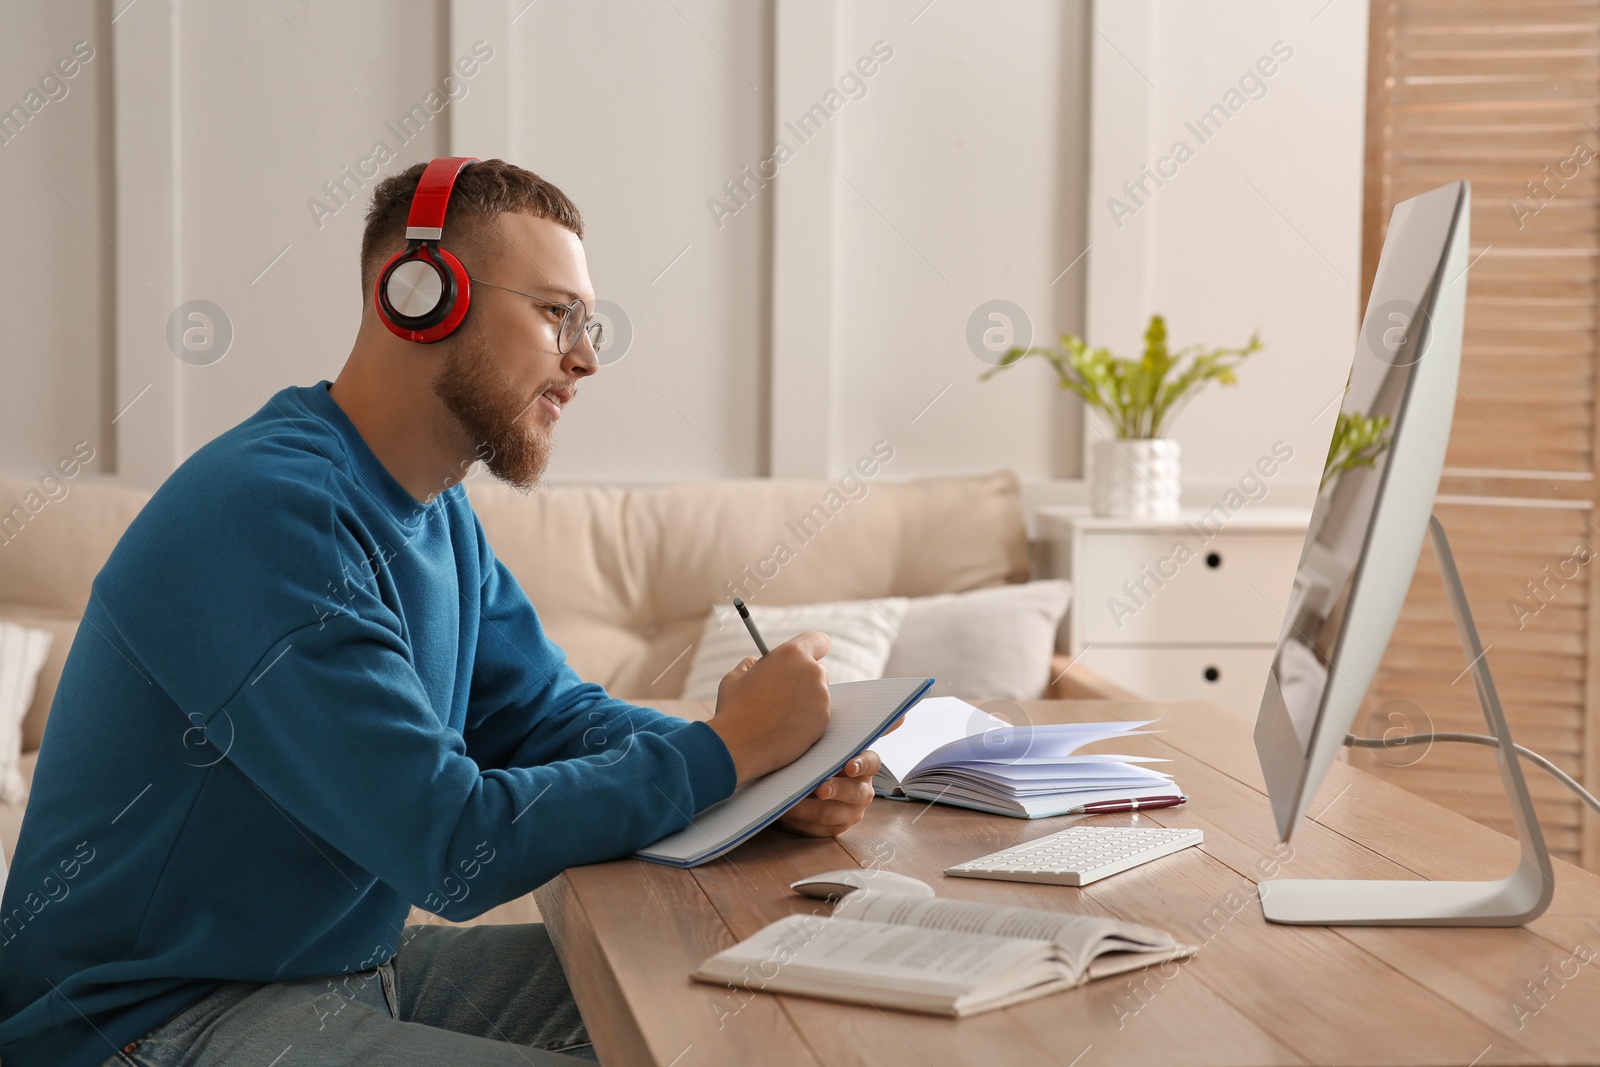 Photo of Online test. Man studying with computer at home